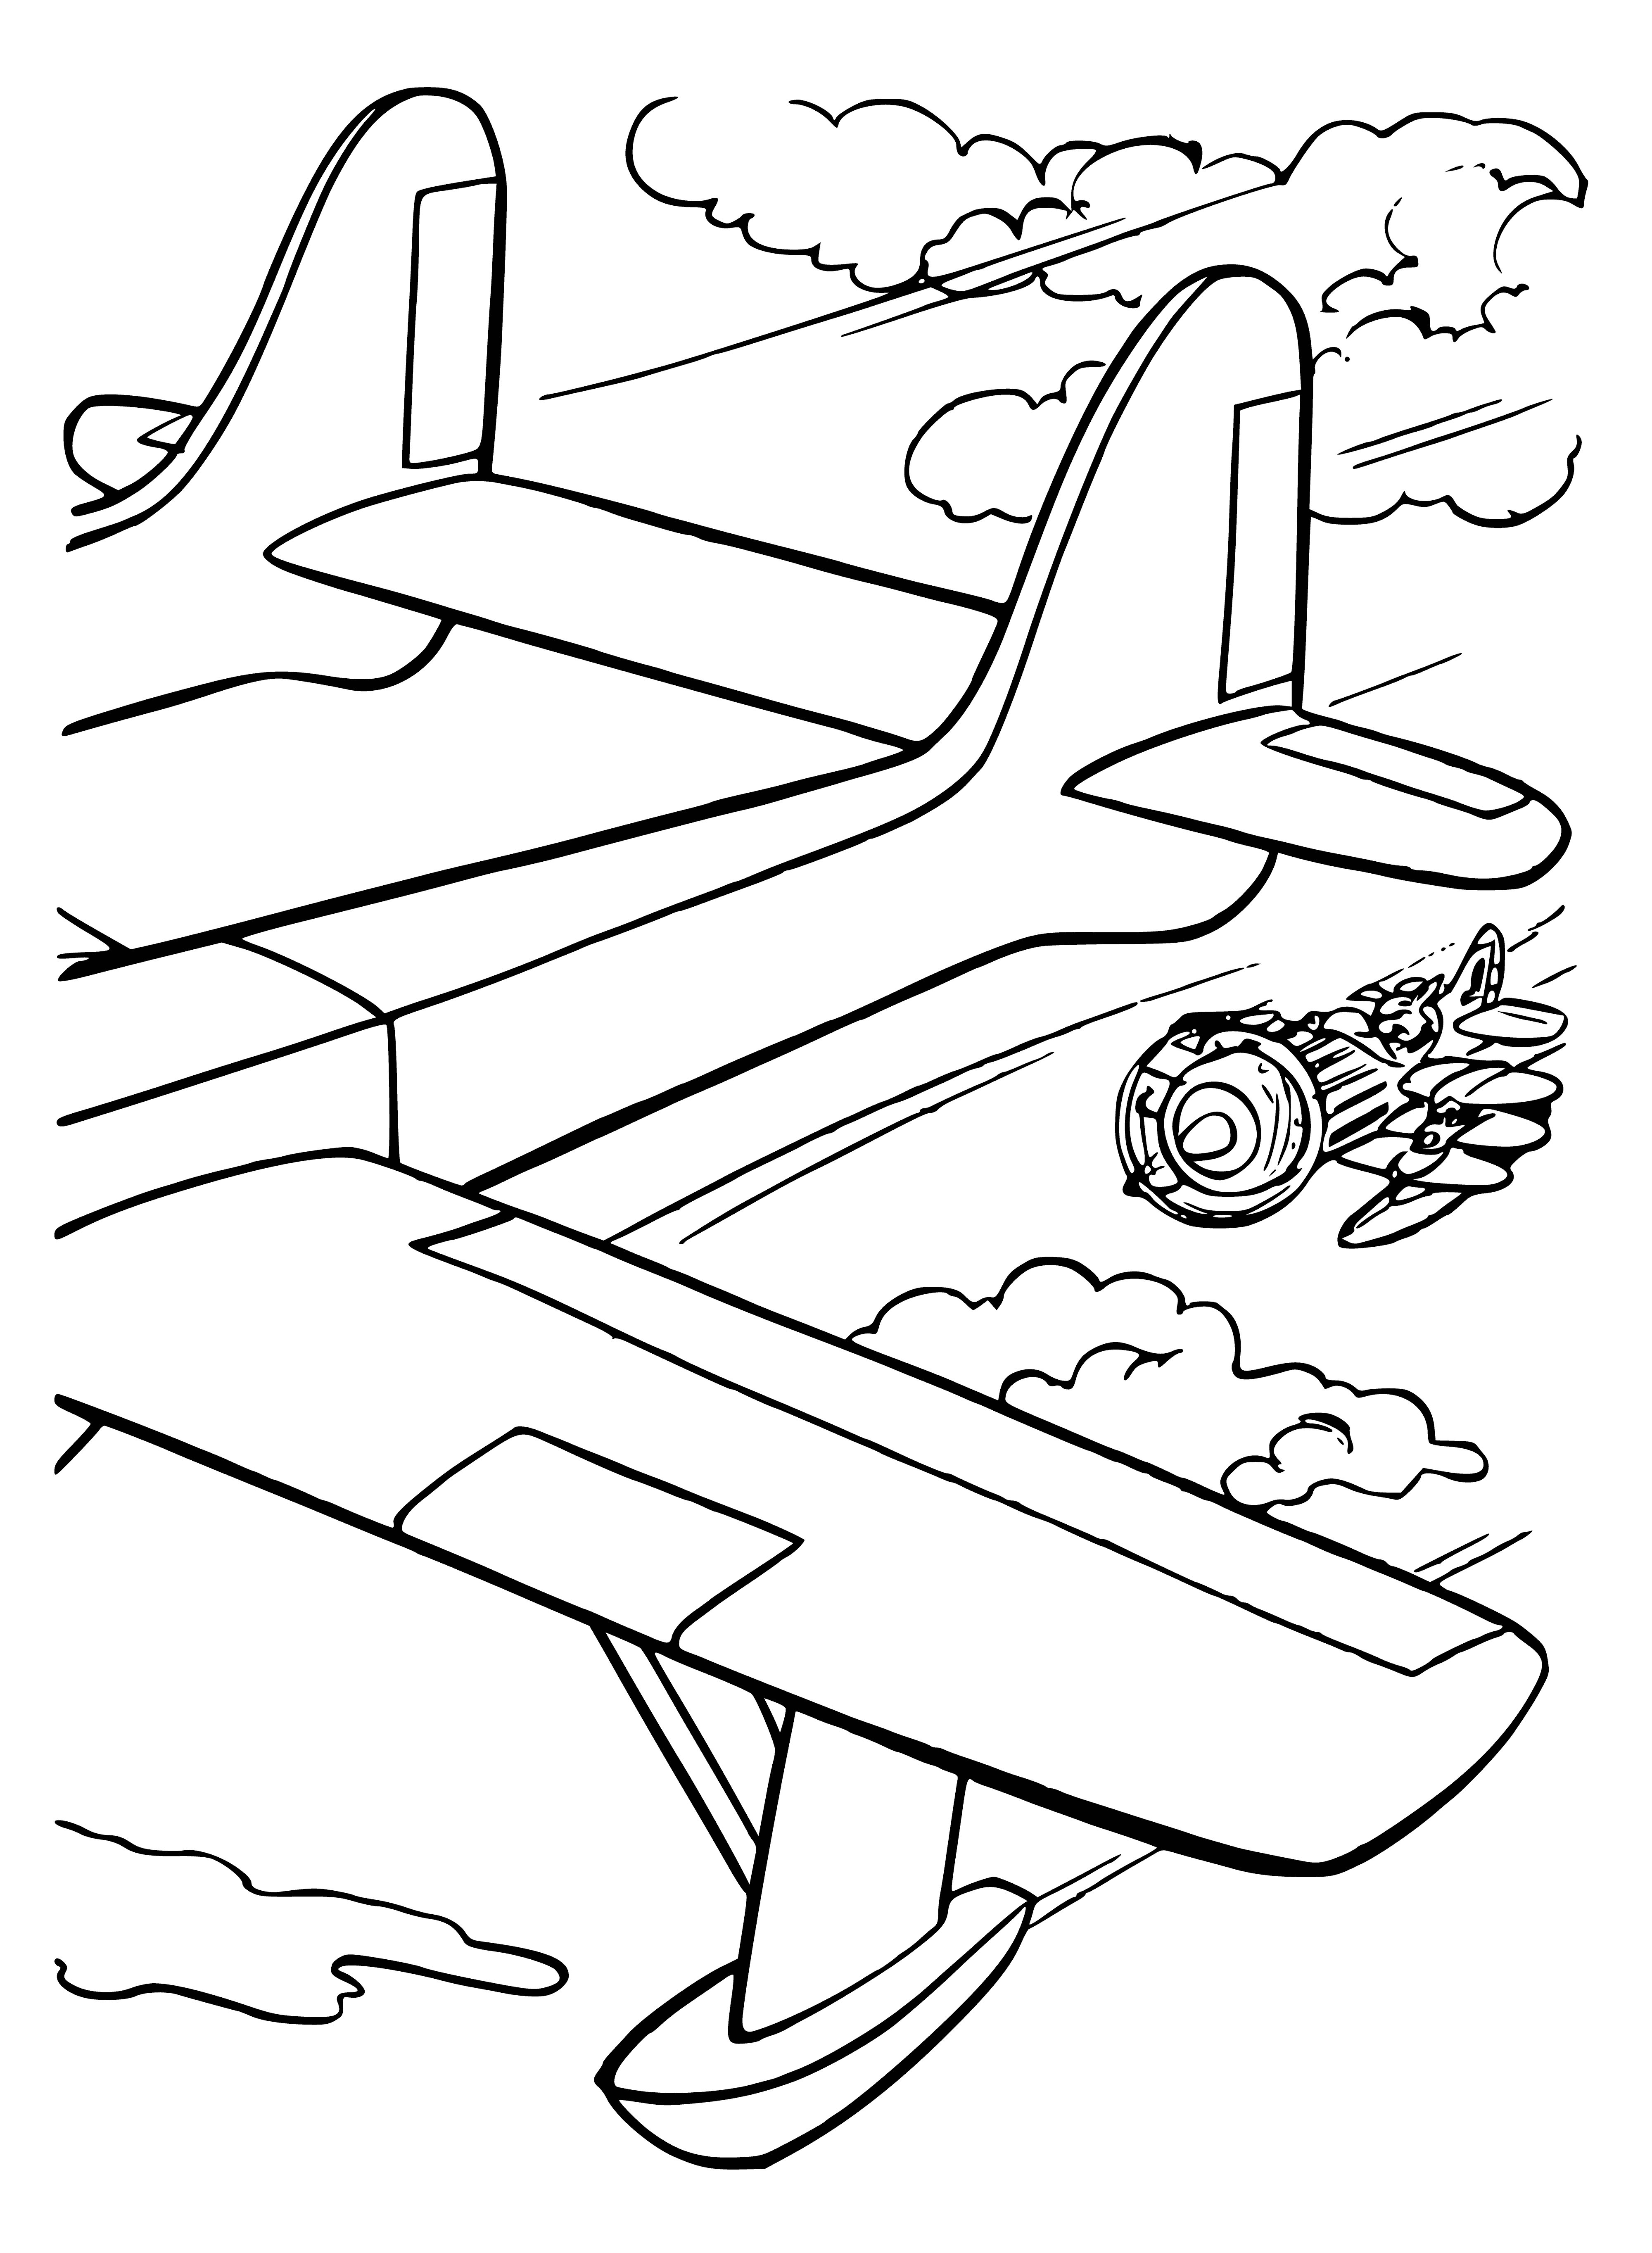 Pirate chase coloring page